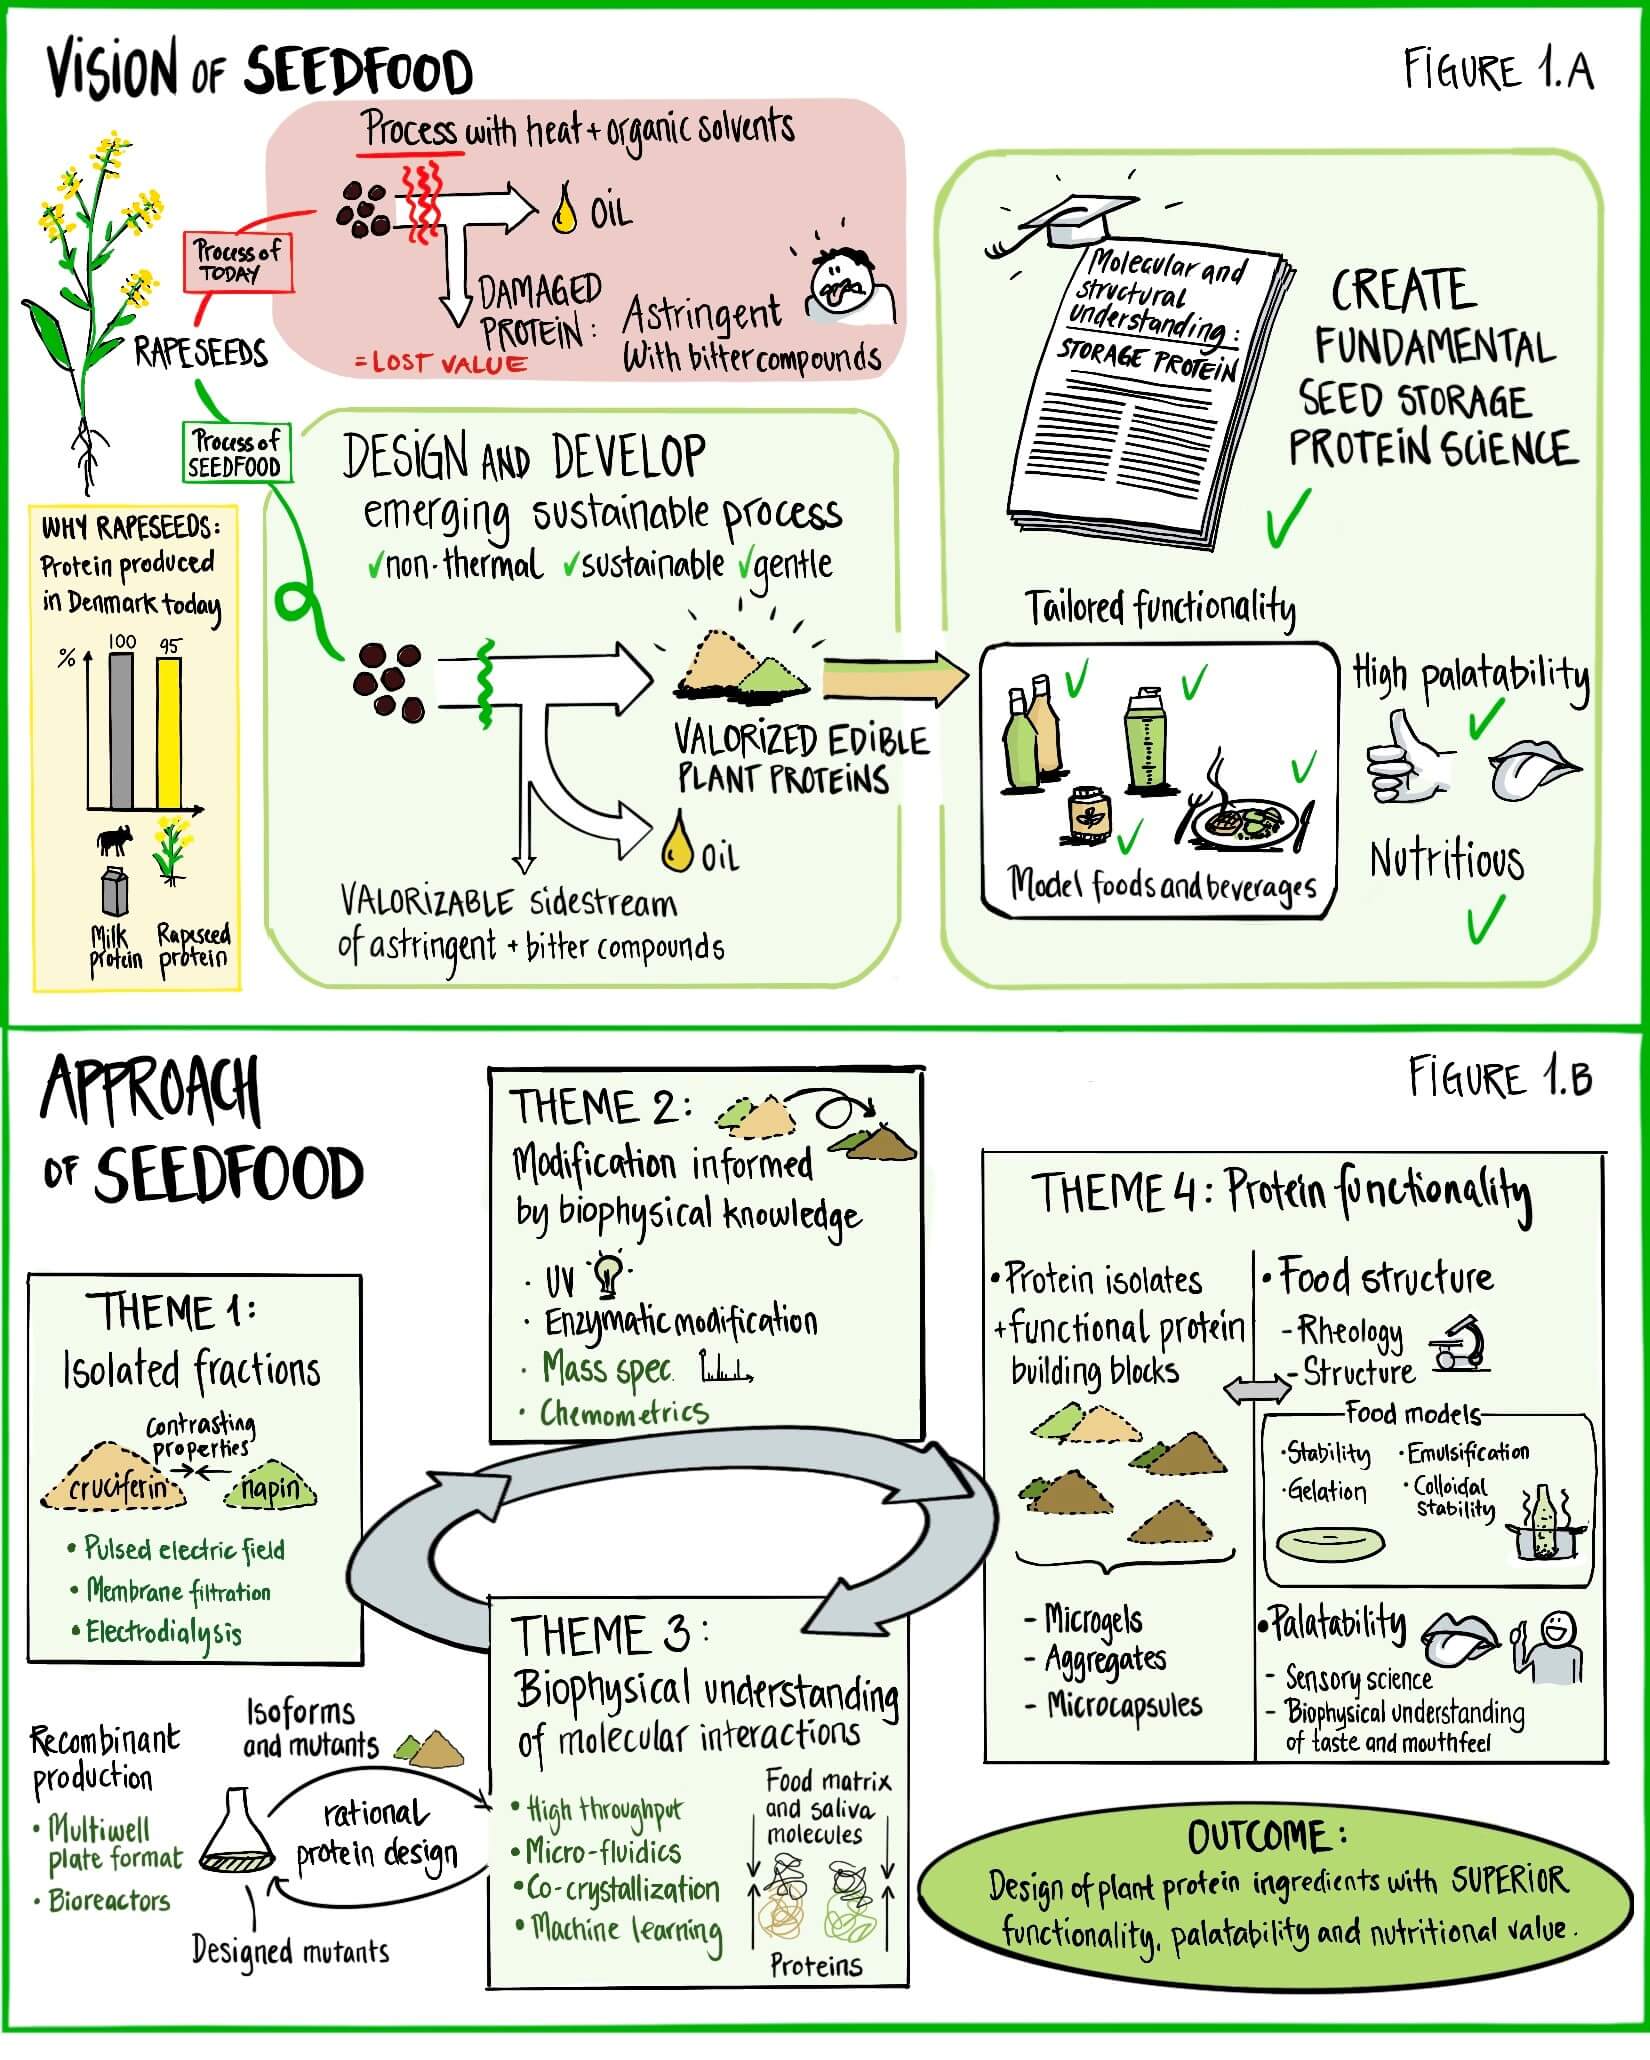 Figure outlining the vision of SEEDFOOD